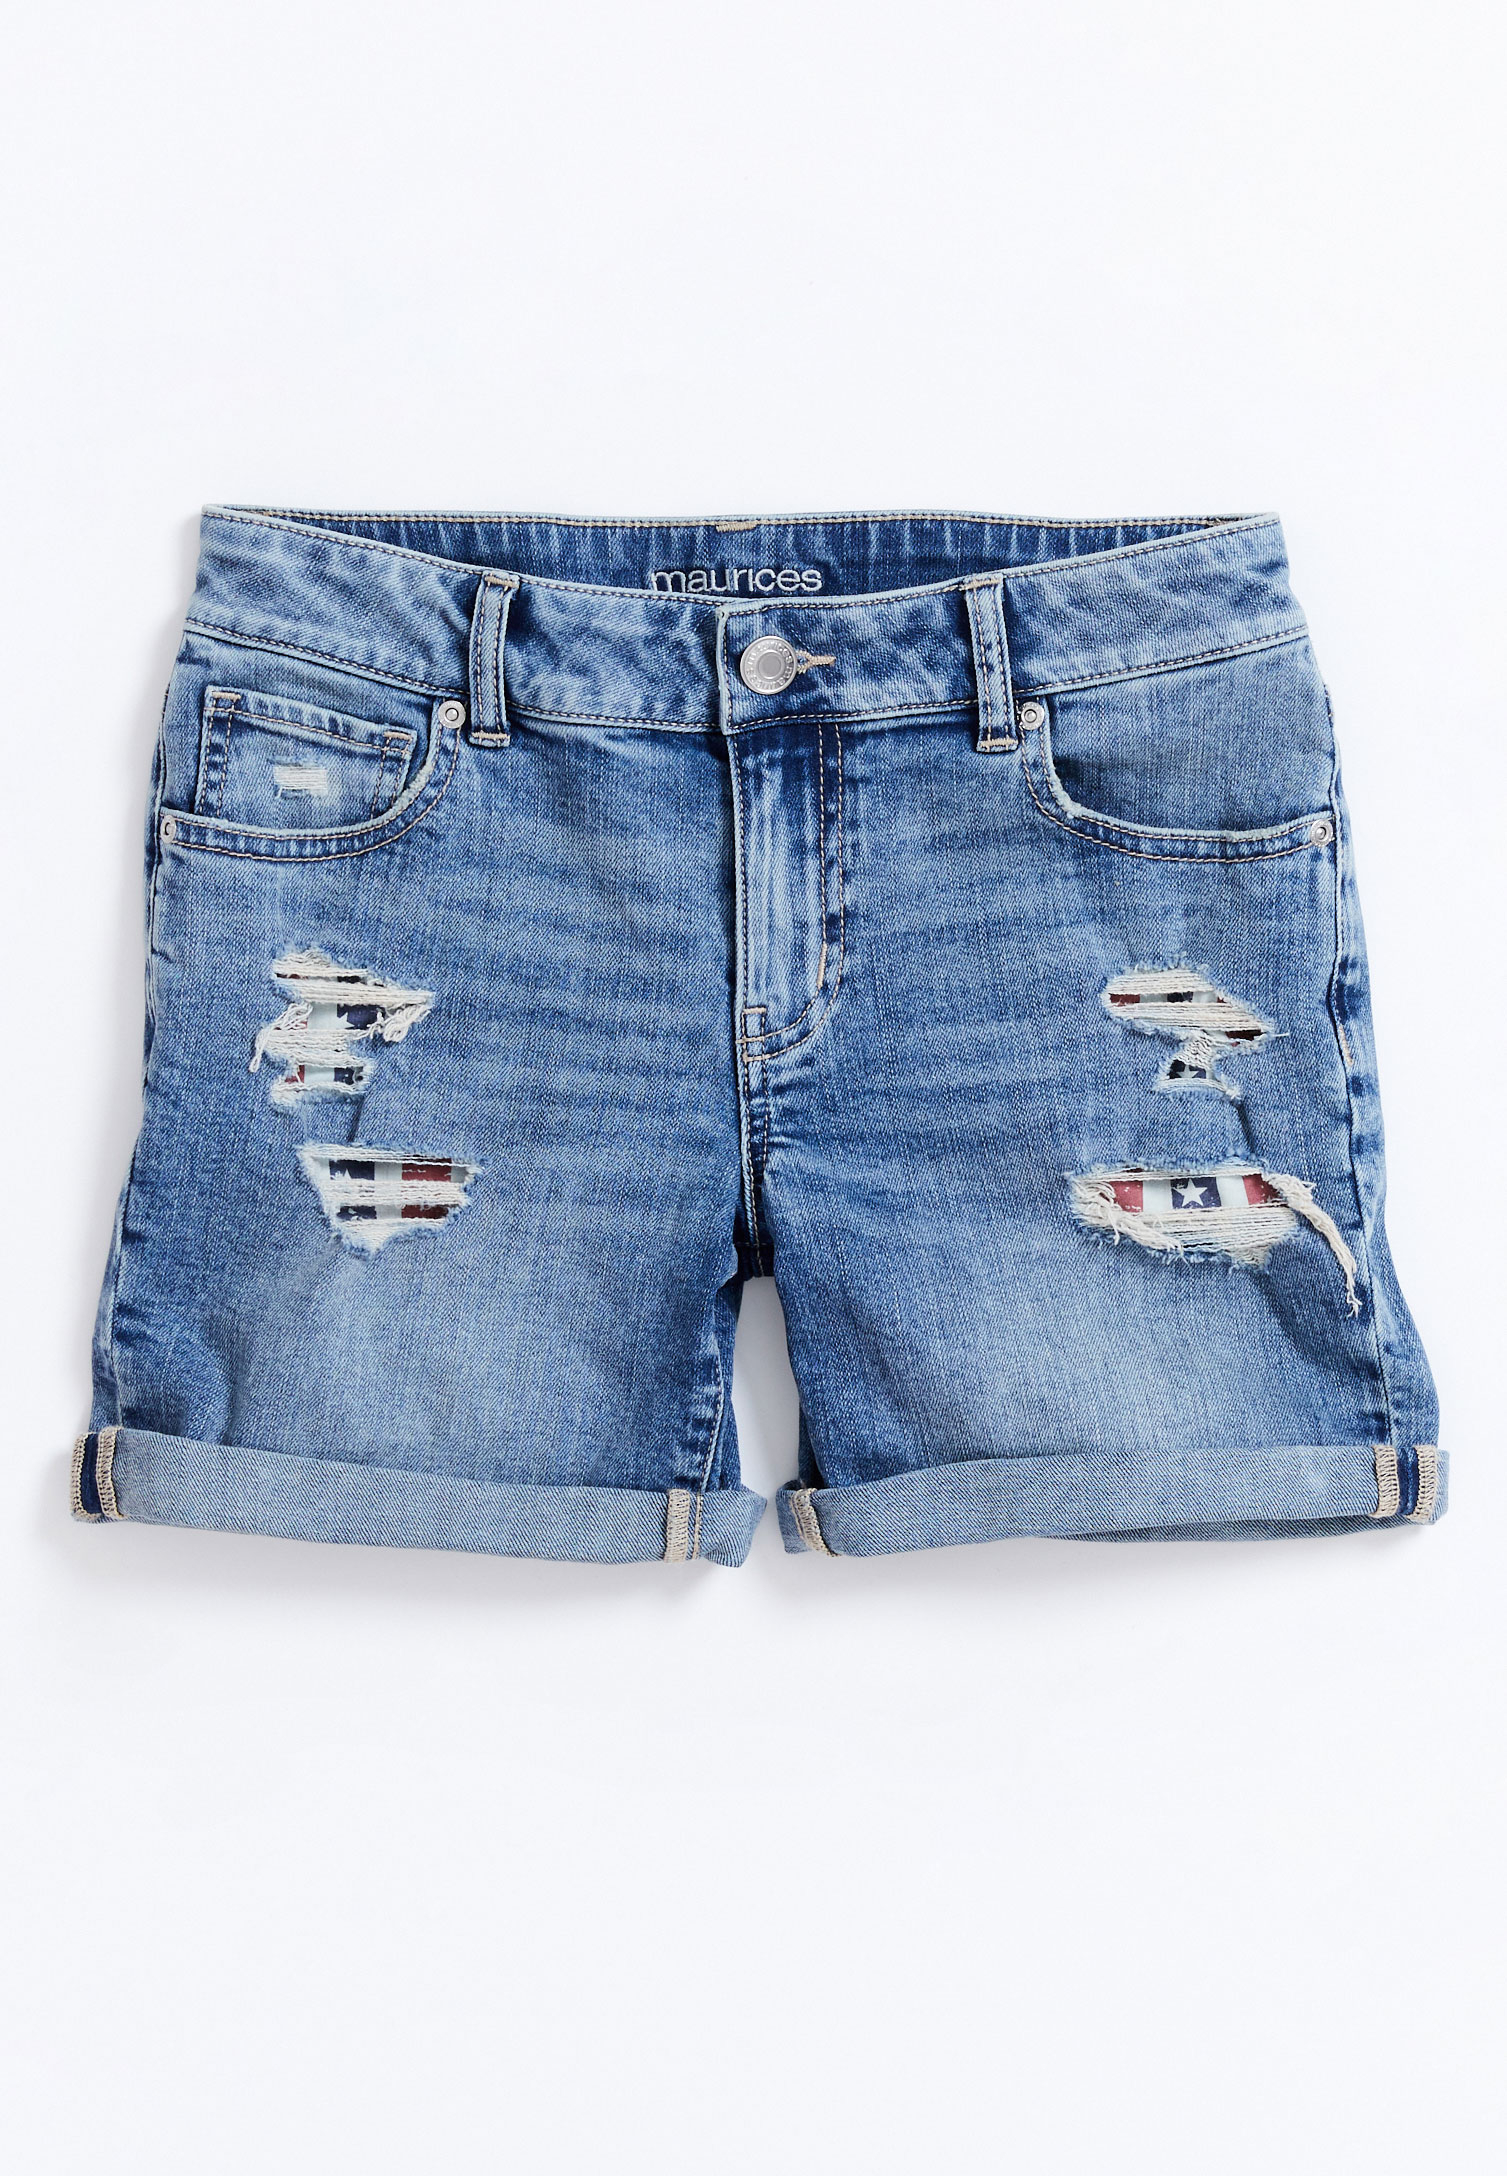 maurices jean shorts